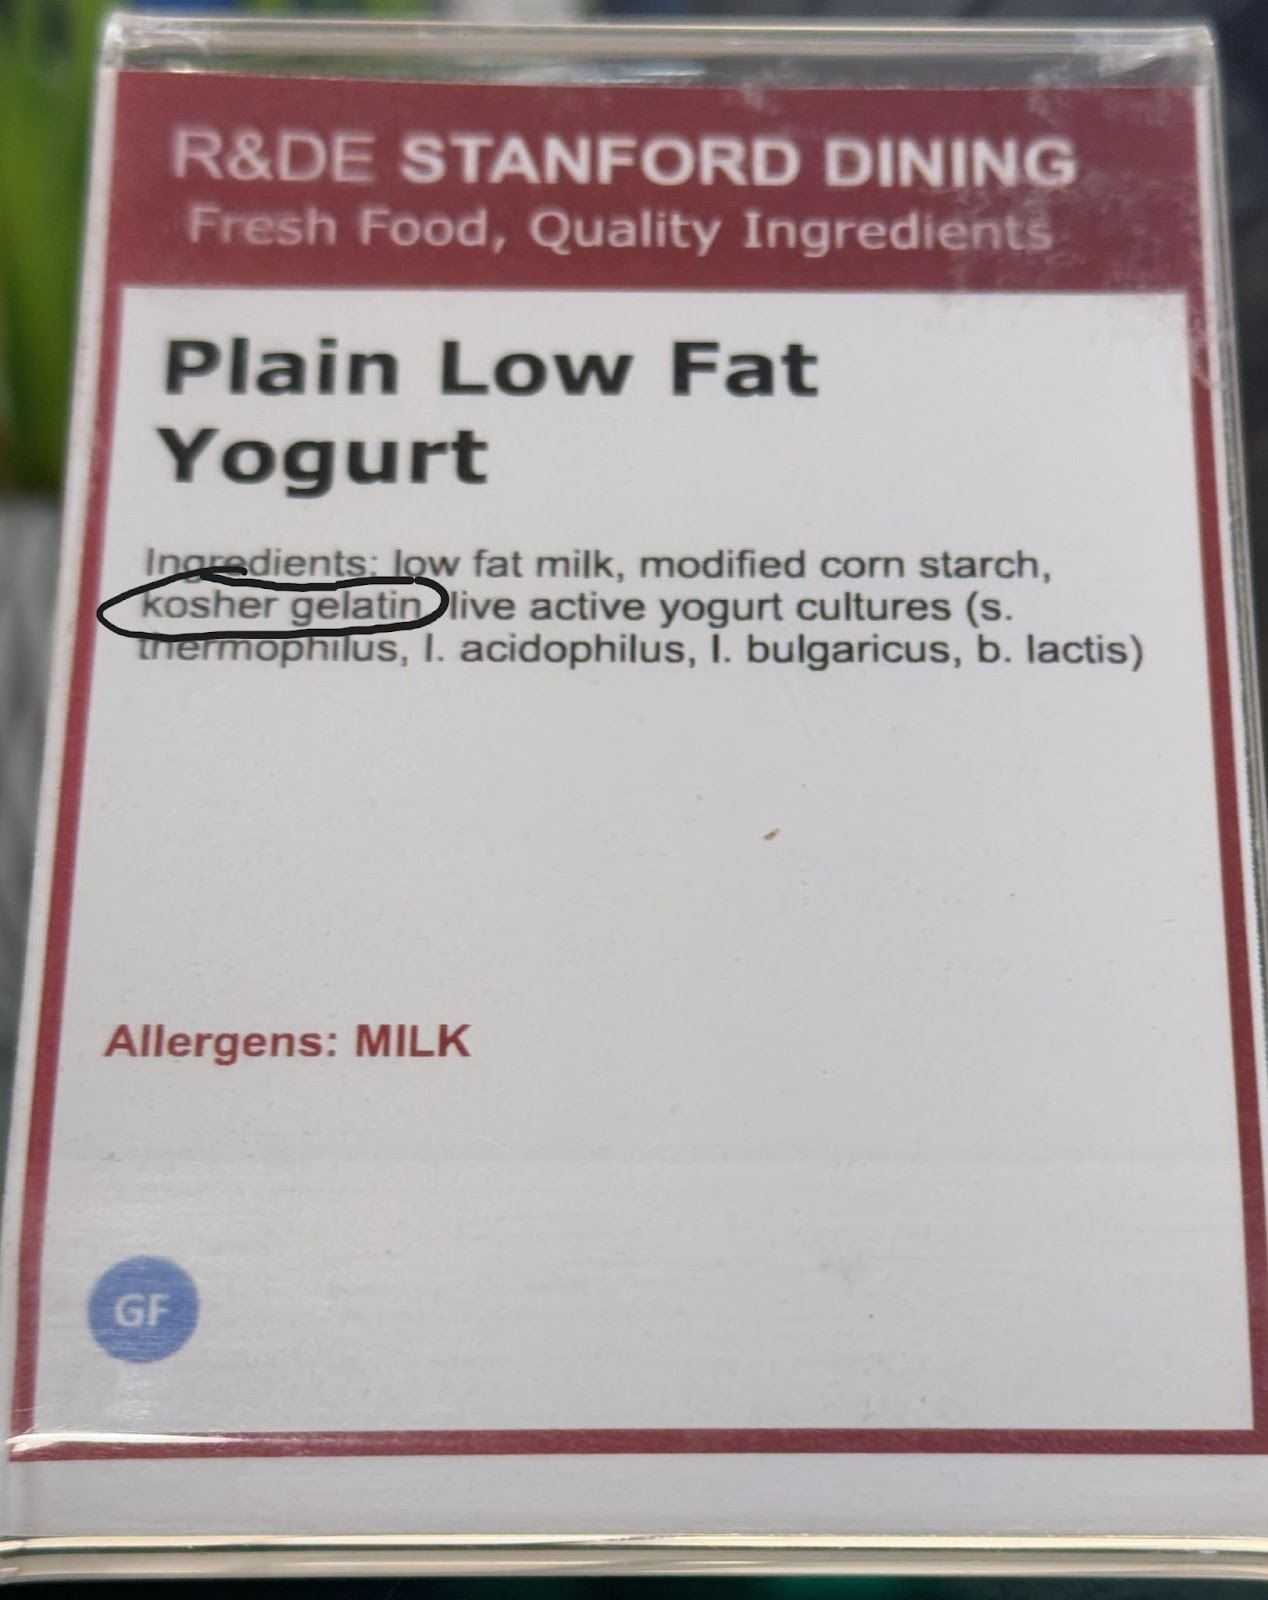 The ingredients of the plain low fat yogurt are listed on it's ingredient card, including kosher gelatin. 